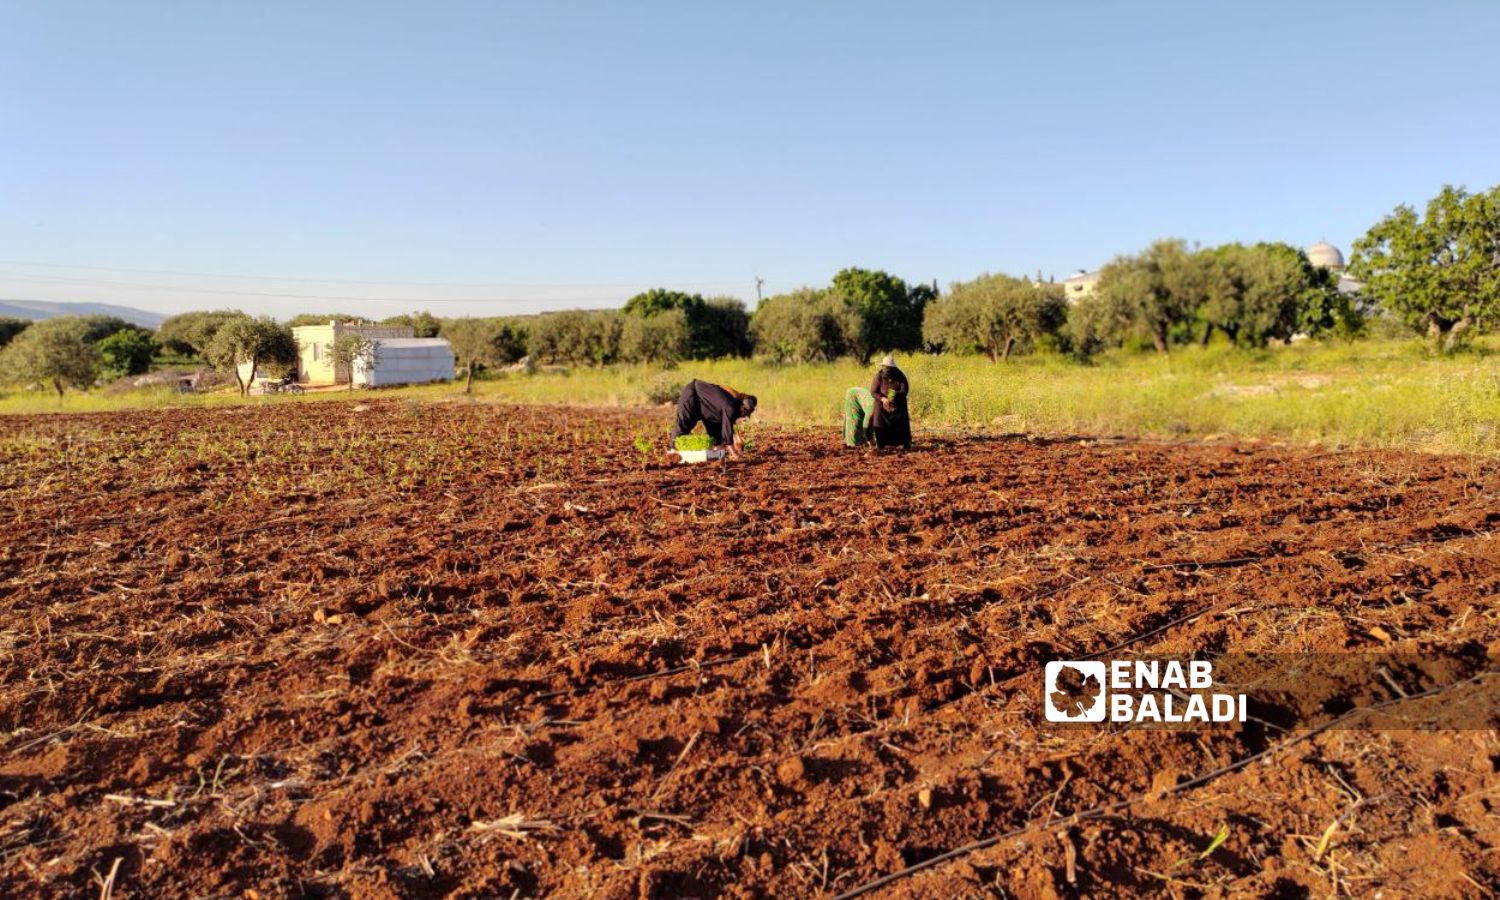 Jabal al-Zawiya’s farmers cultivate small crops of their land for fear of landmines and being forced to flee at any time - June 30, 2023 (Enab Baladi)